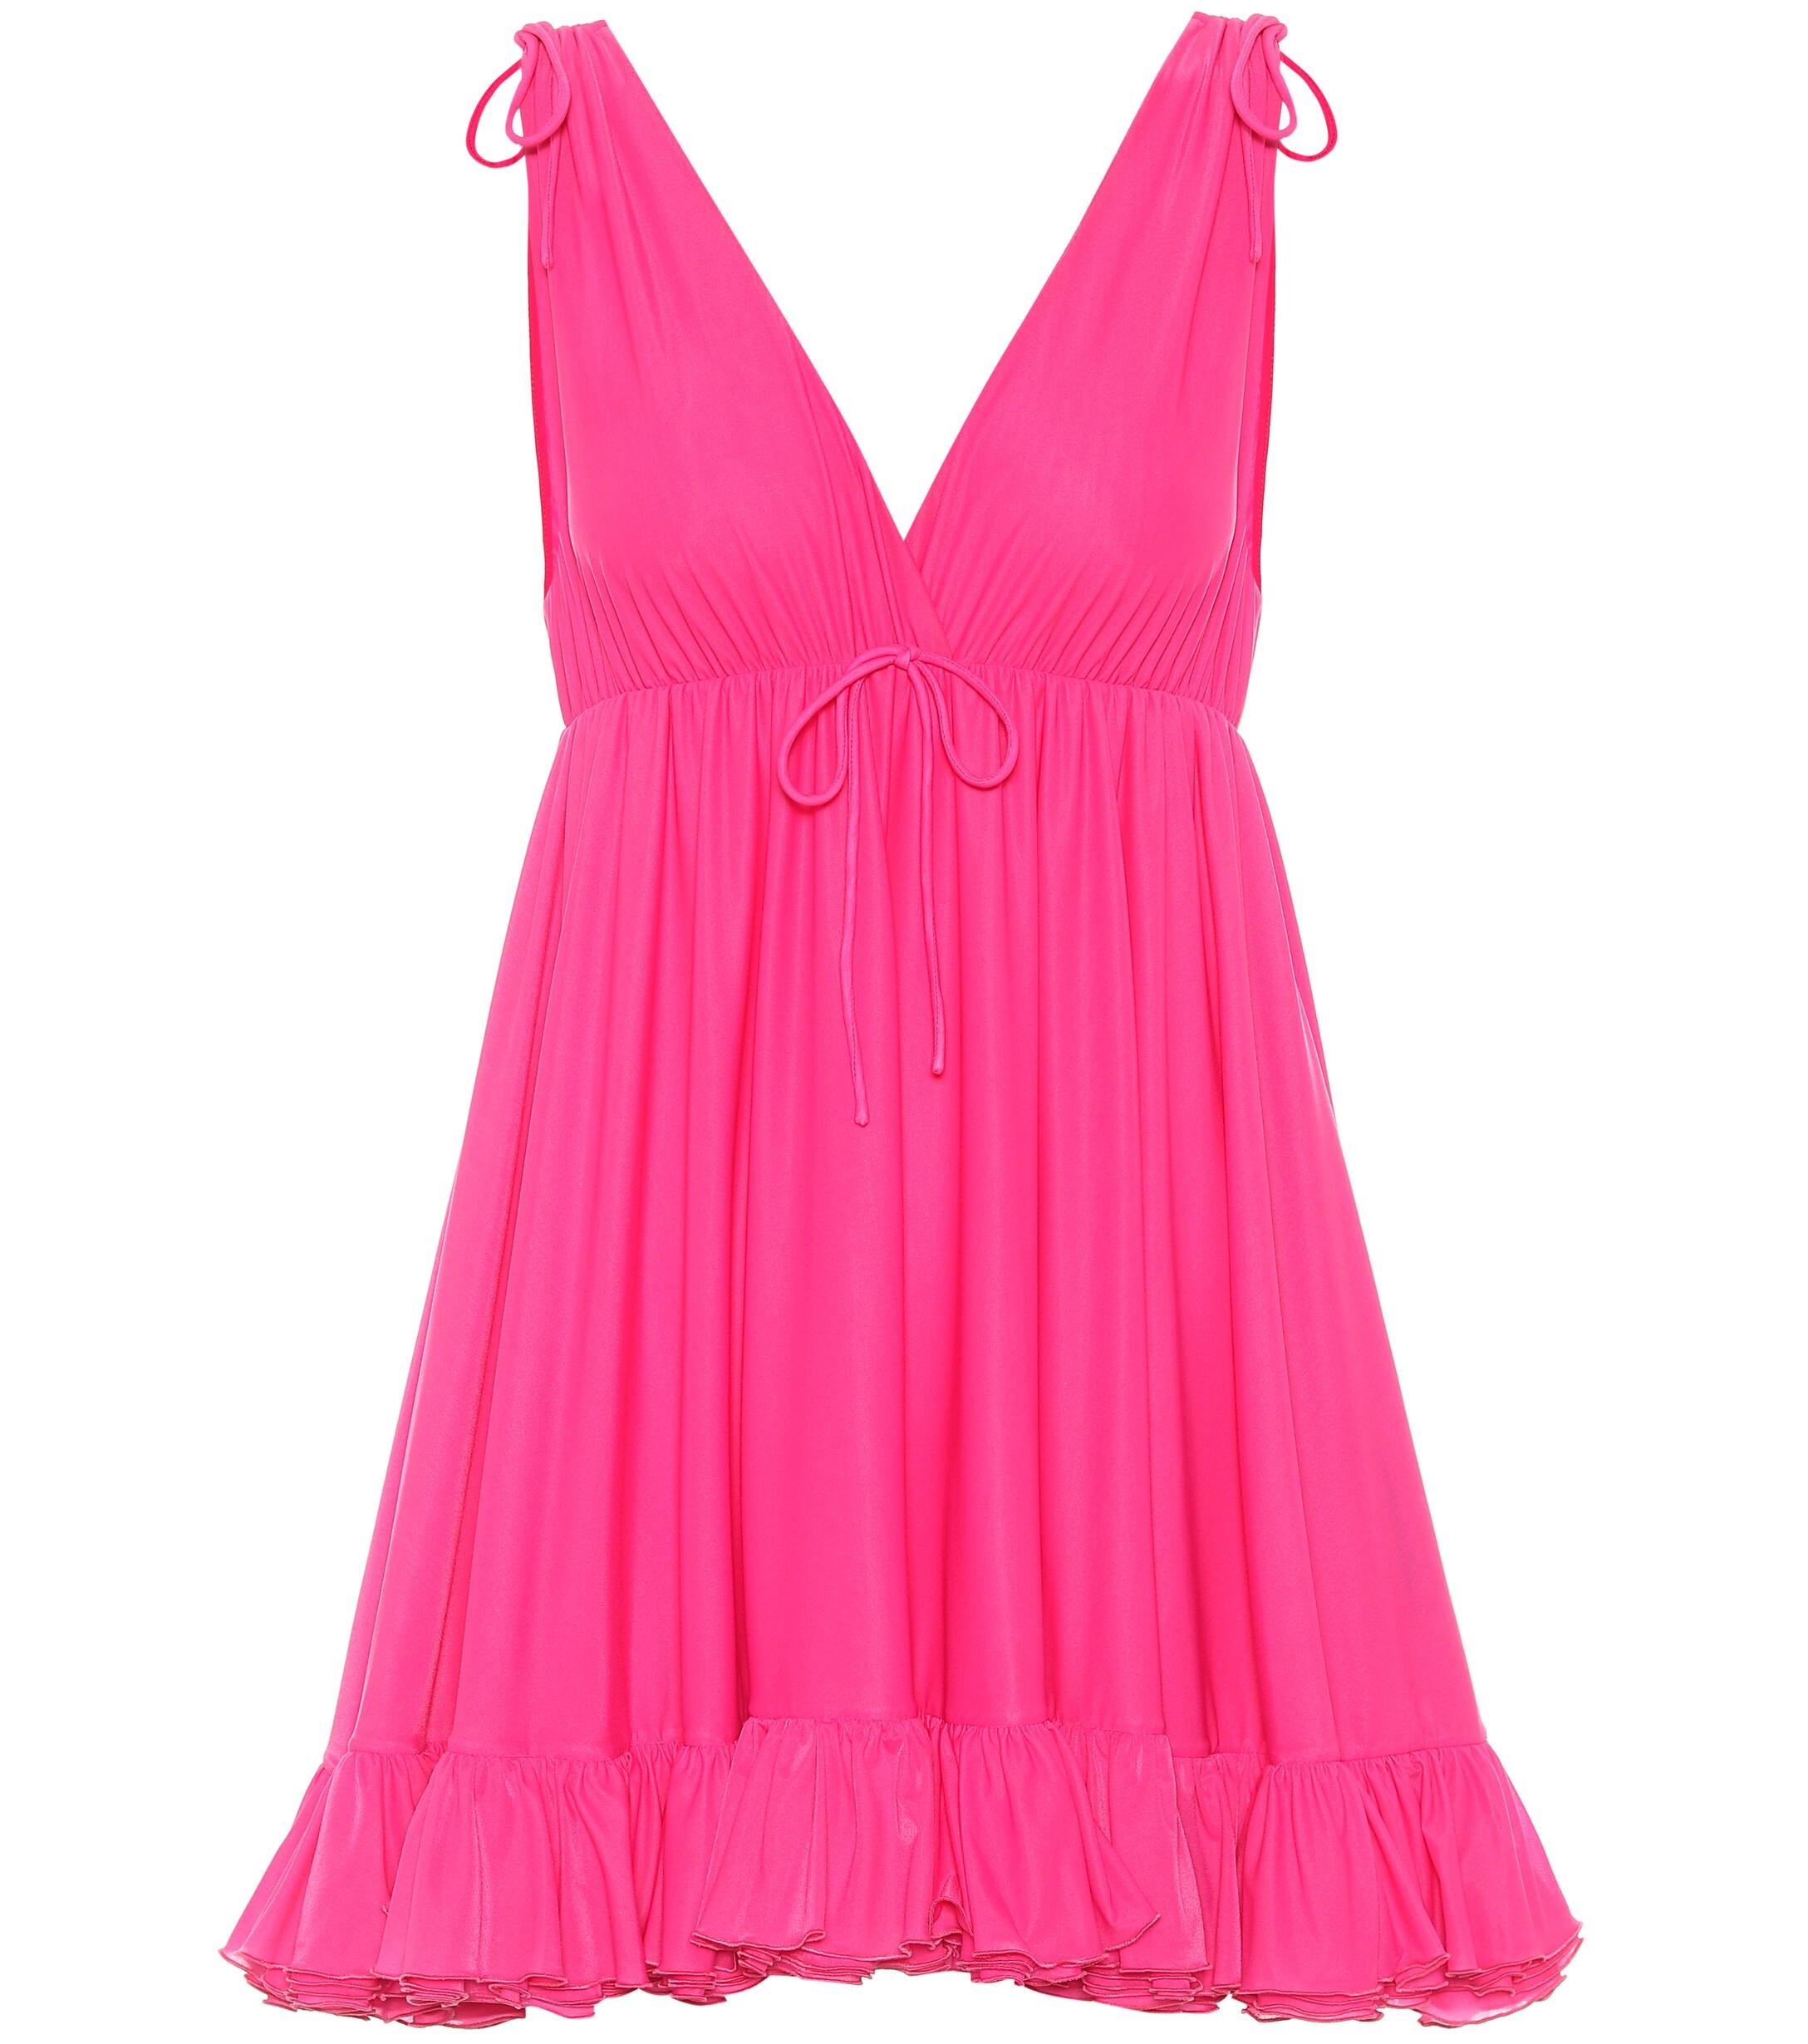 Balenciaga Synthetic Jersey Babydoll Dress in Pink - Lyst